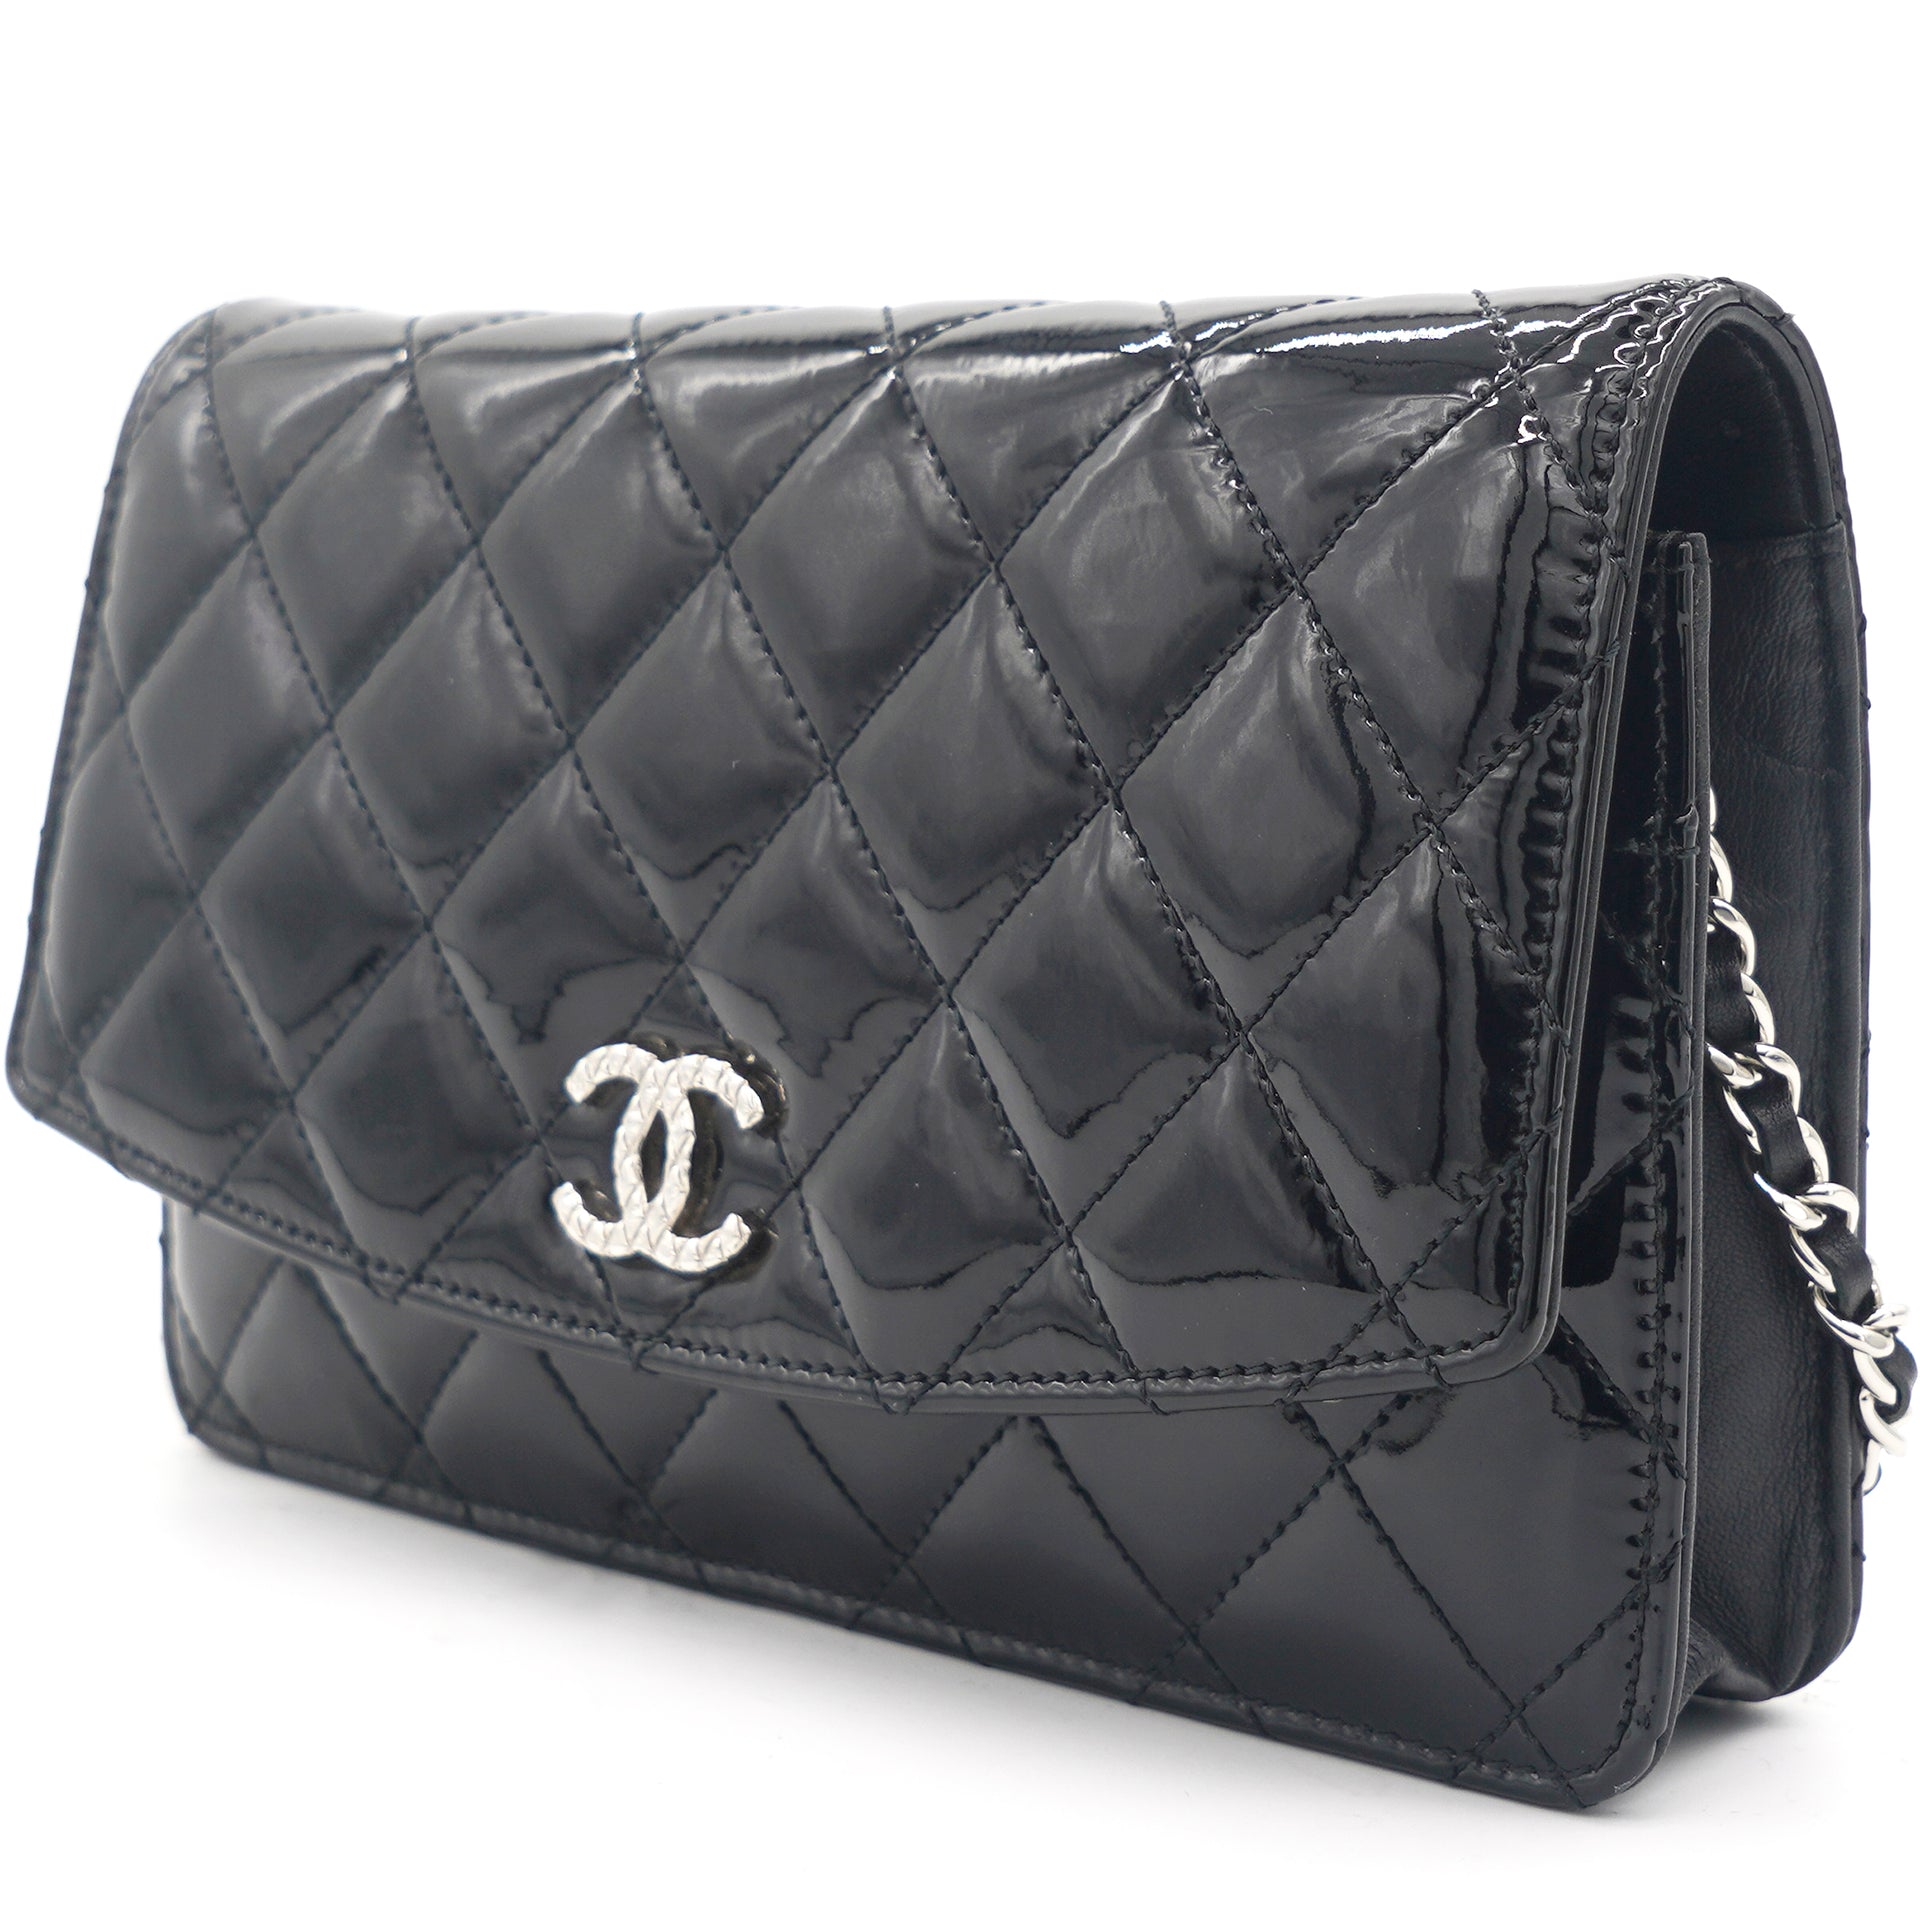 CHANEL diamond patent leather Classic Chain Shoulder Bag silver buckle –  Brand Off Hong Kong Online Store